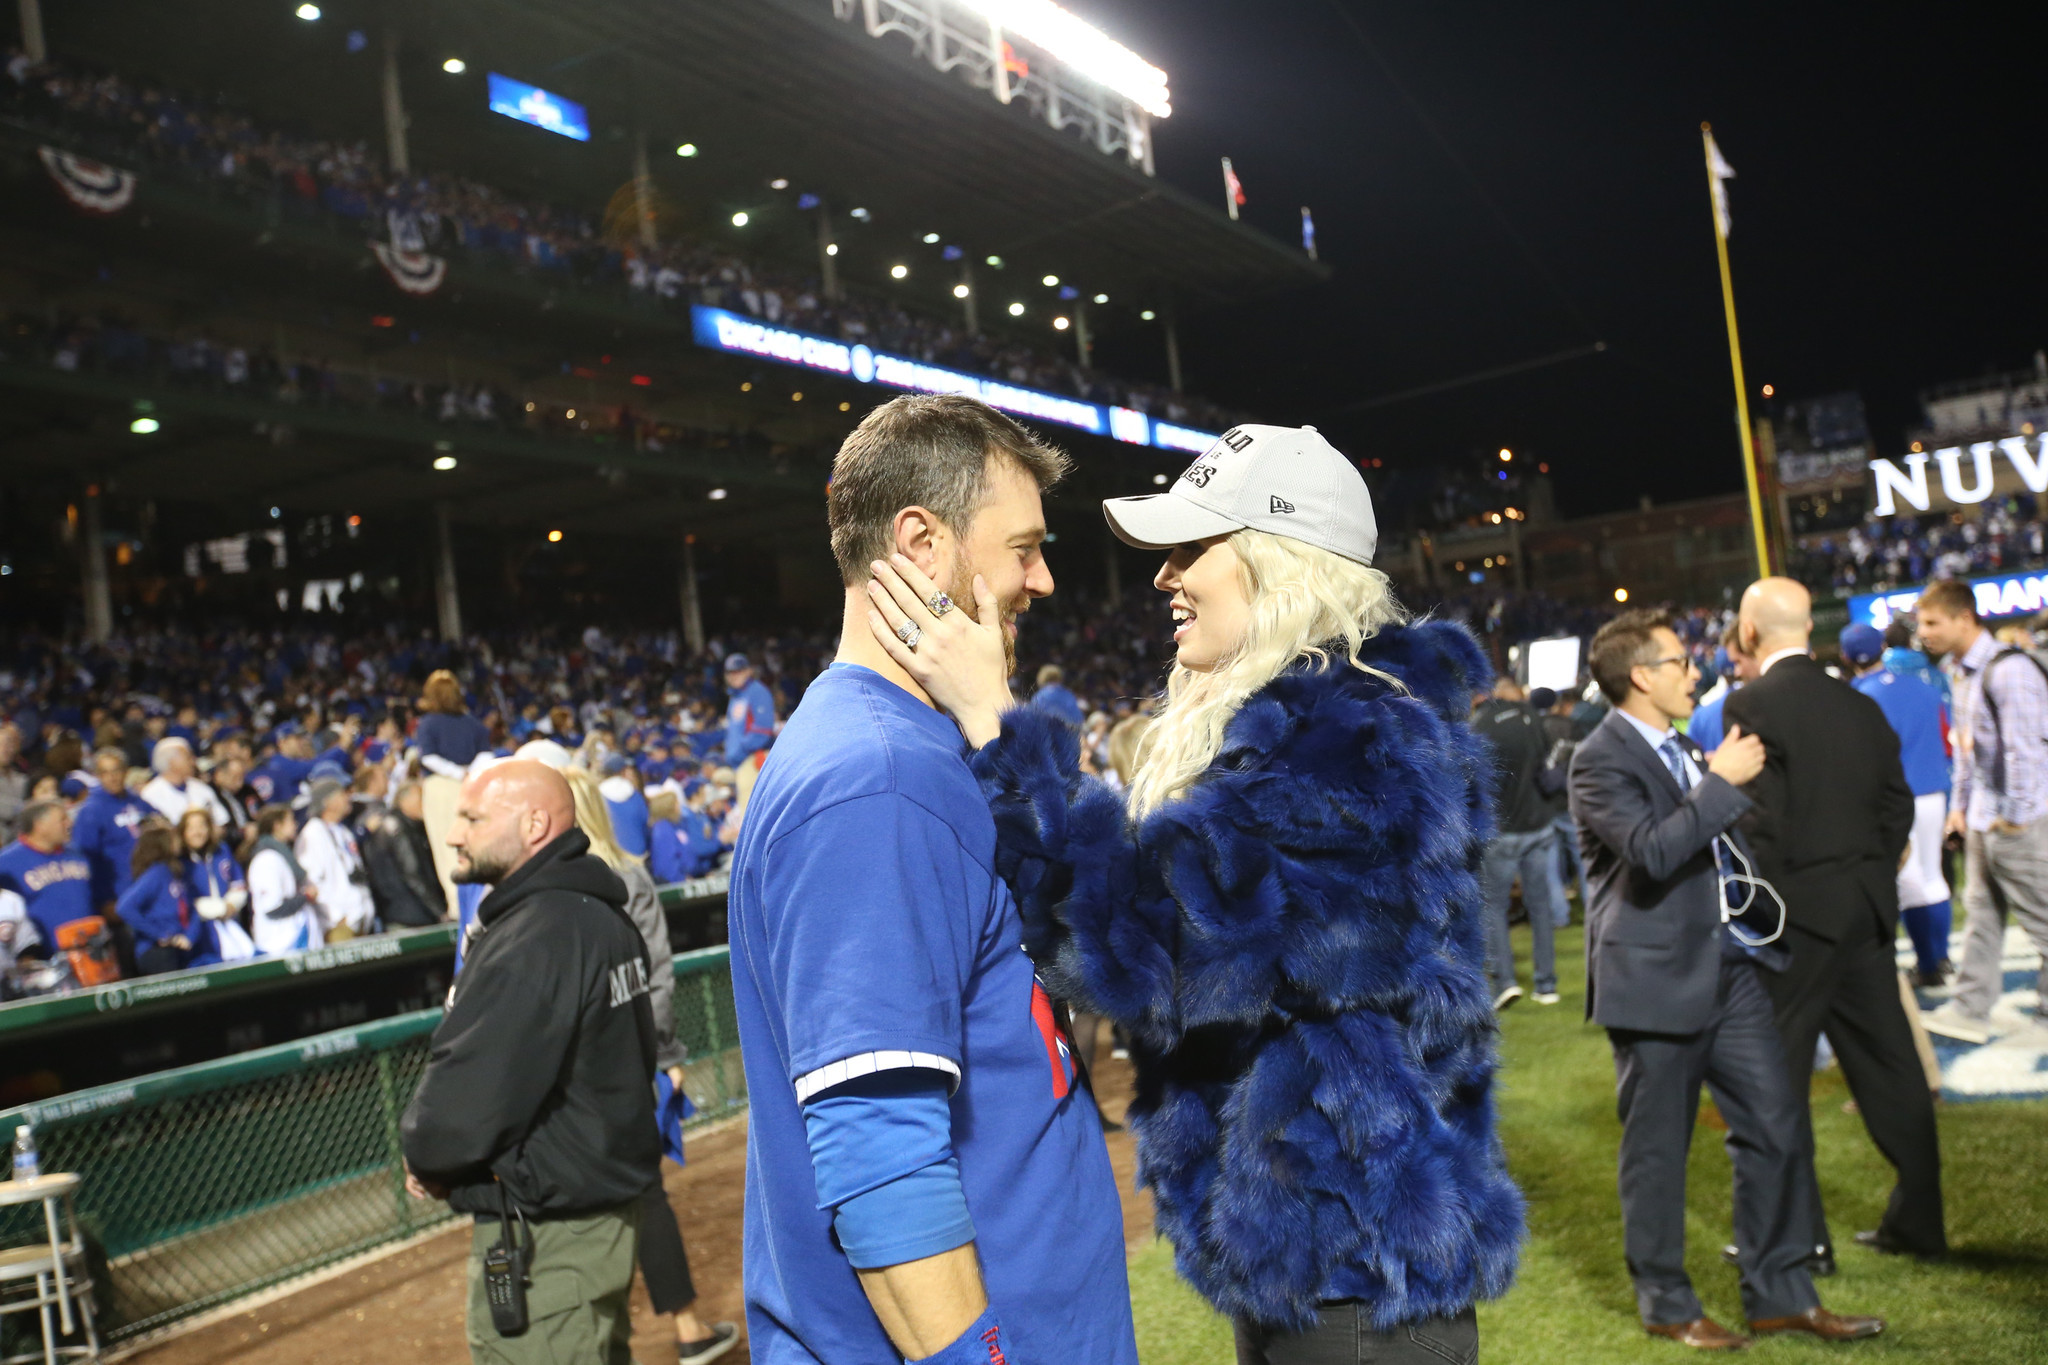 Former Cubs star Ben Zobrist accuses pastor of affair with his